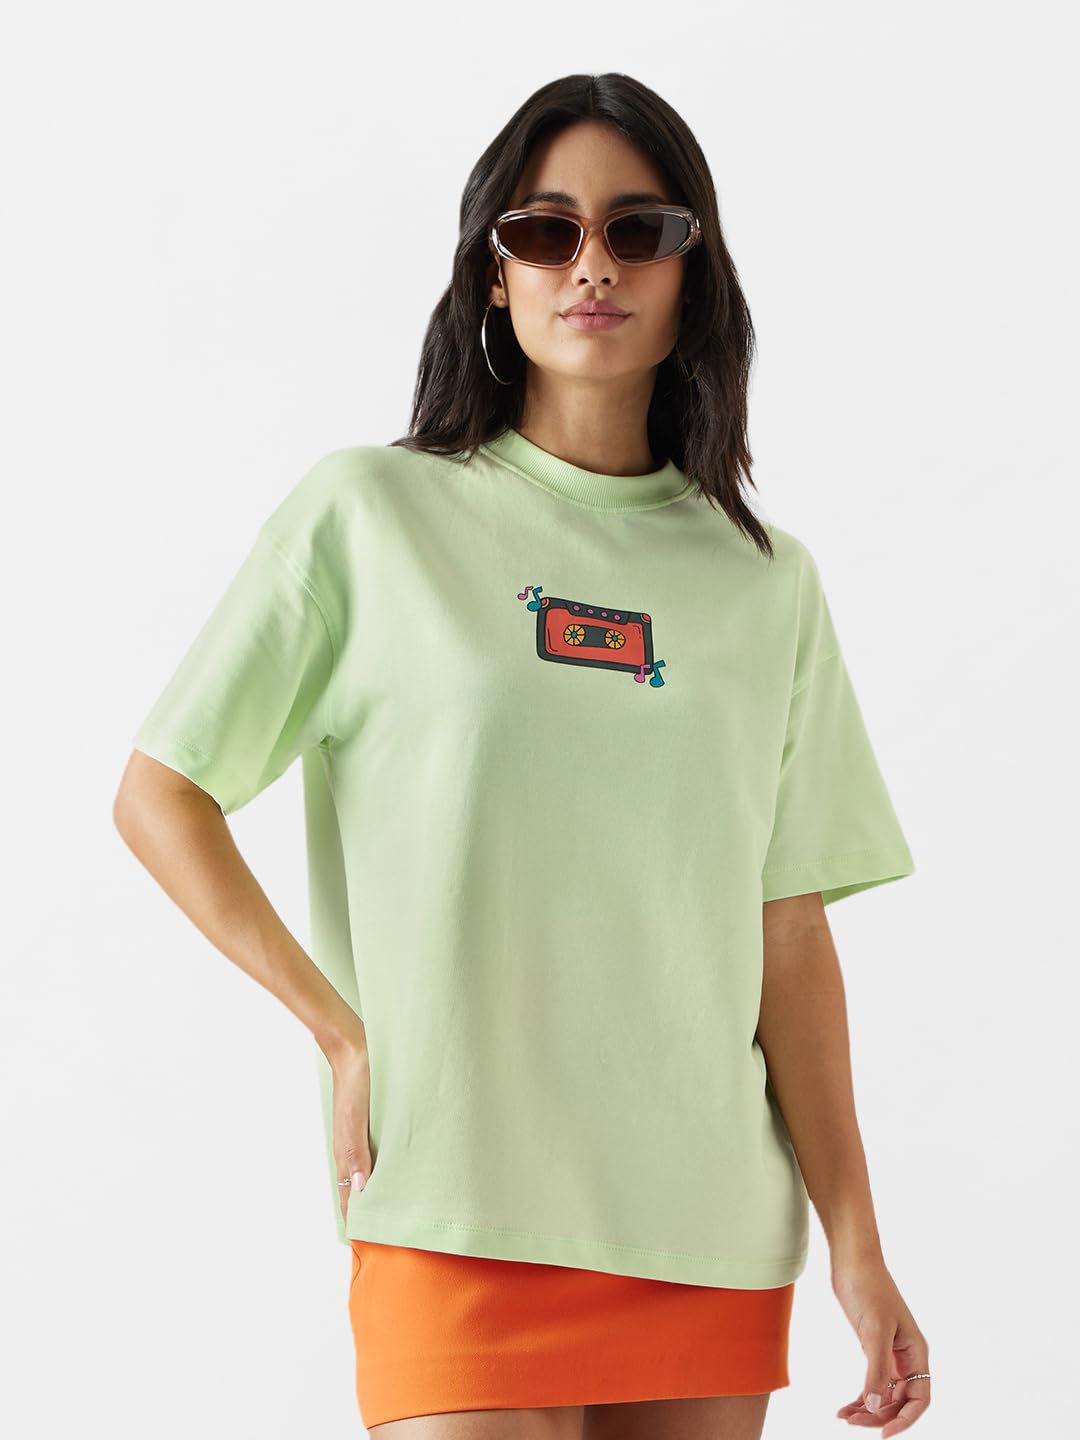 The Souled Store Take Me Home Women and Girls Oversize Fit Half Sleeves Graphic Printed Green Color Cotton T-Shirt